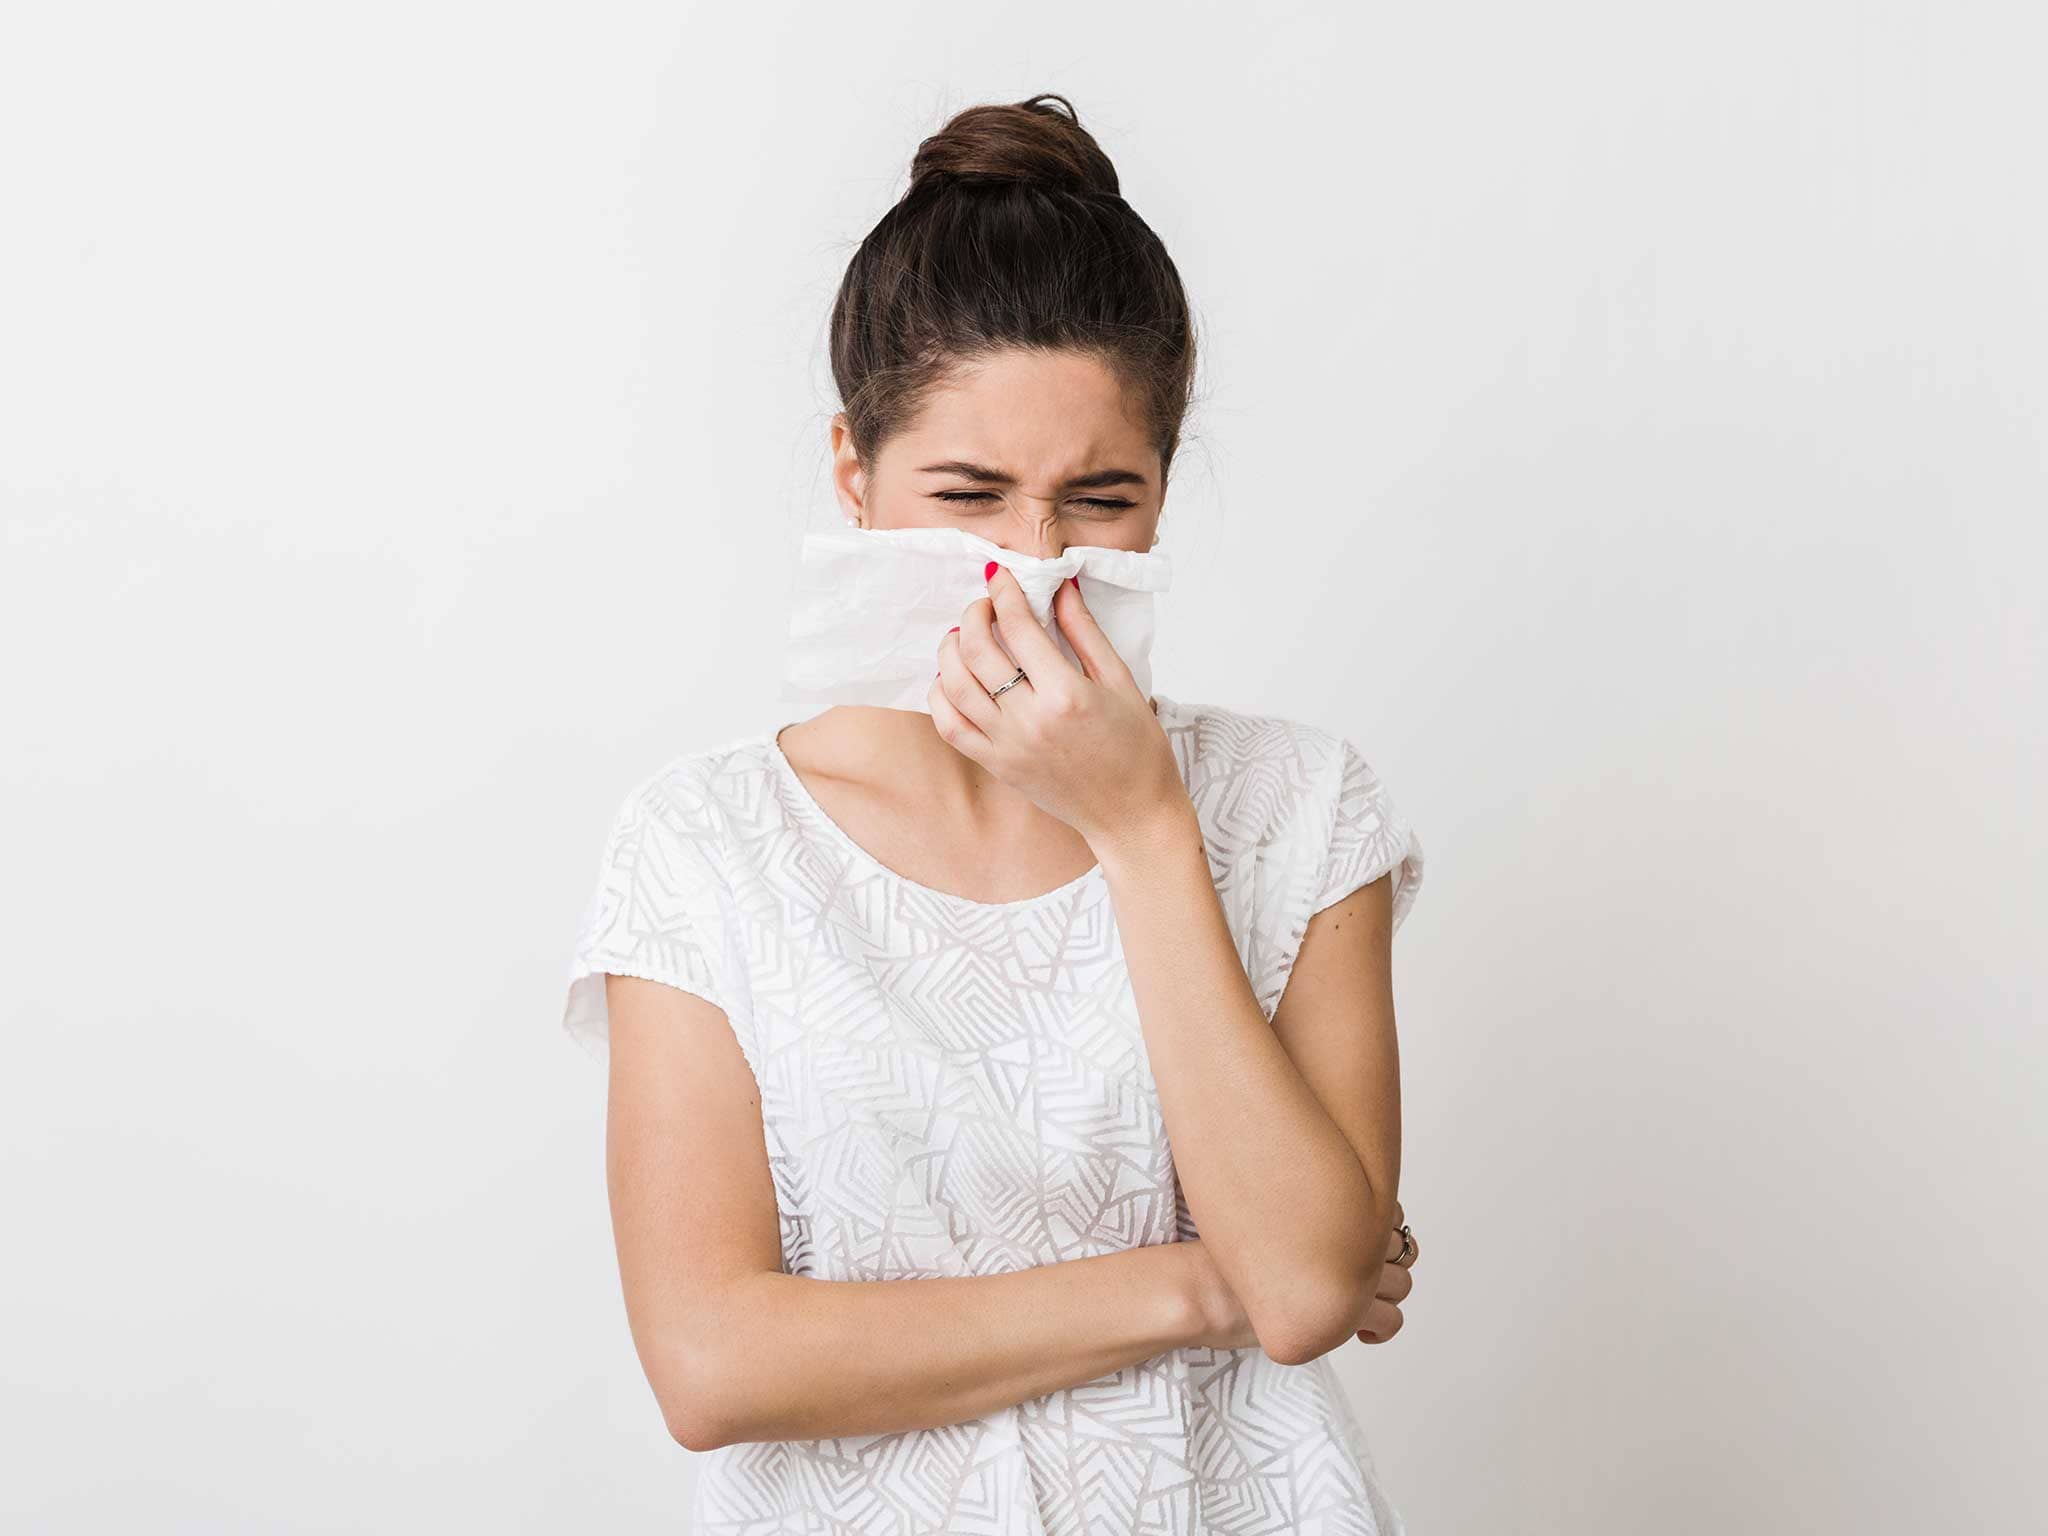 Natural treatment for Sinusitis